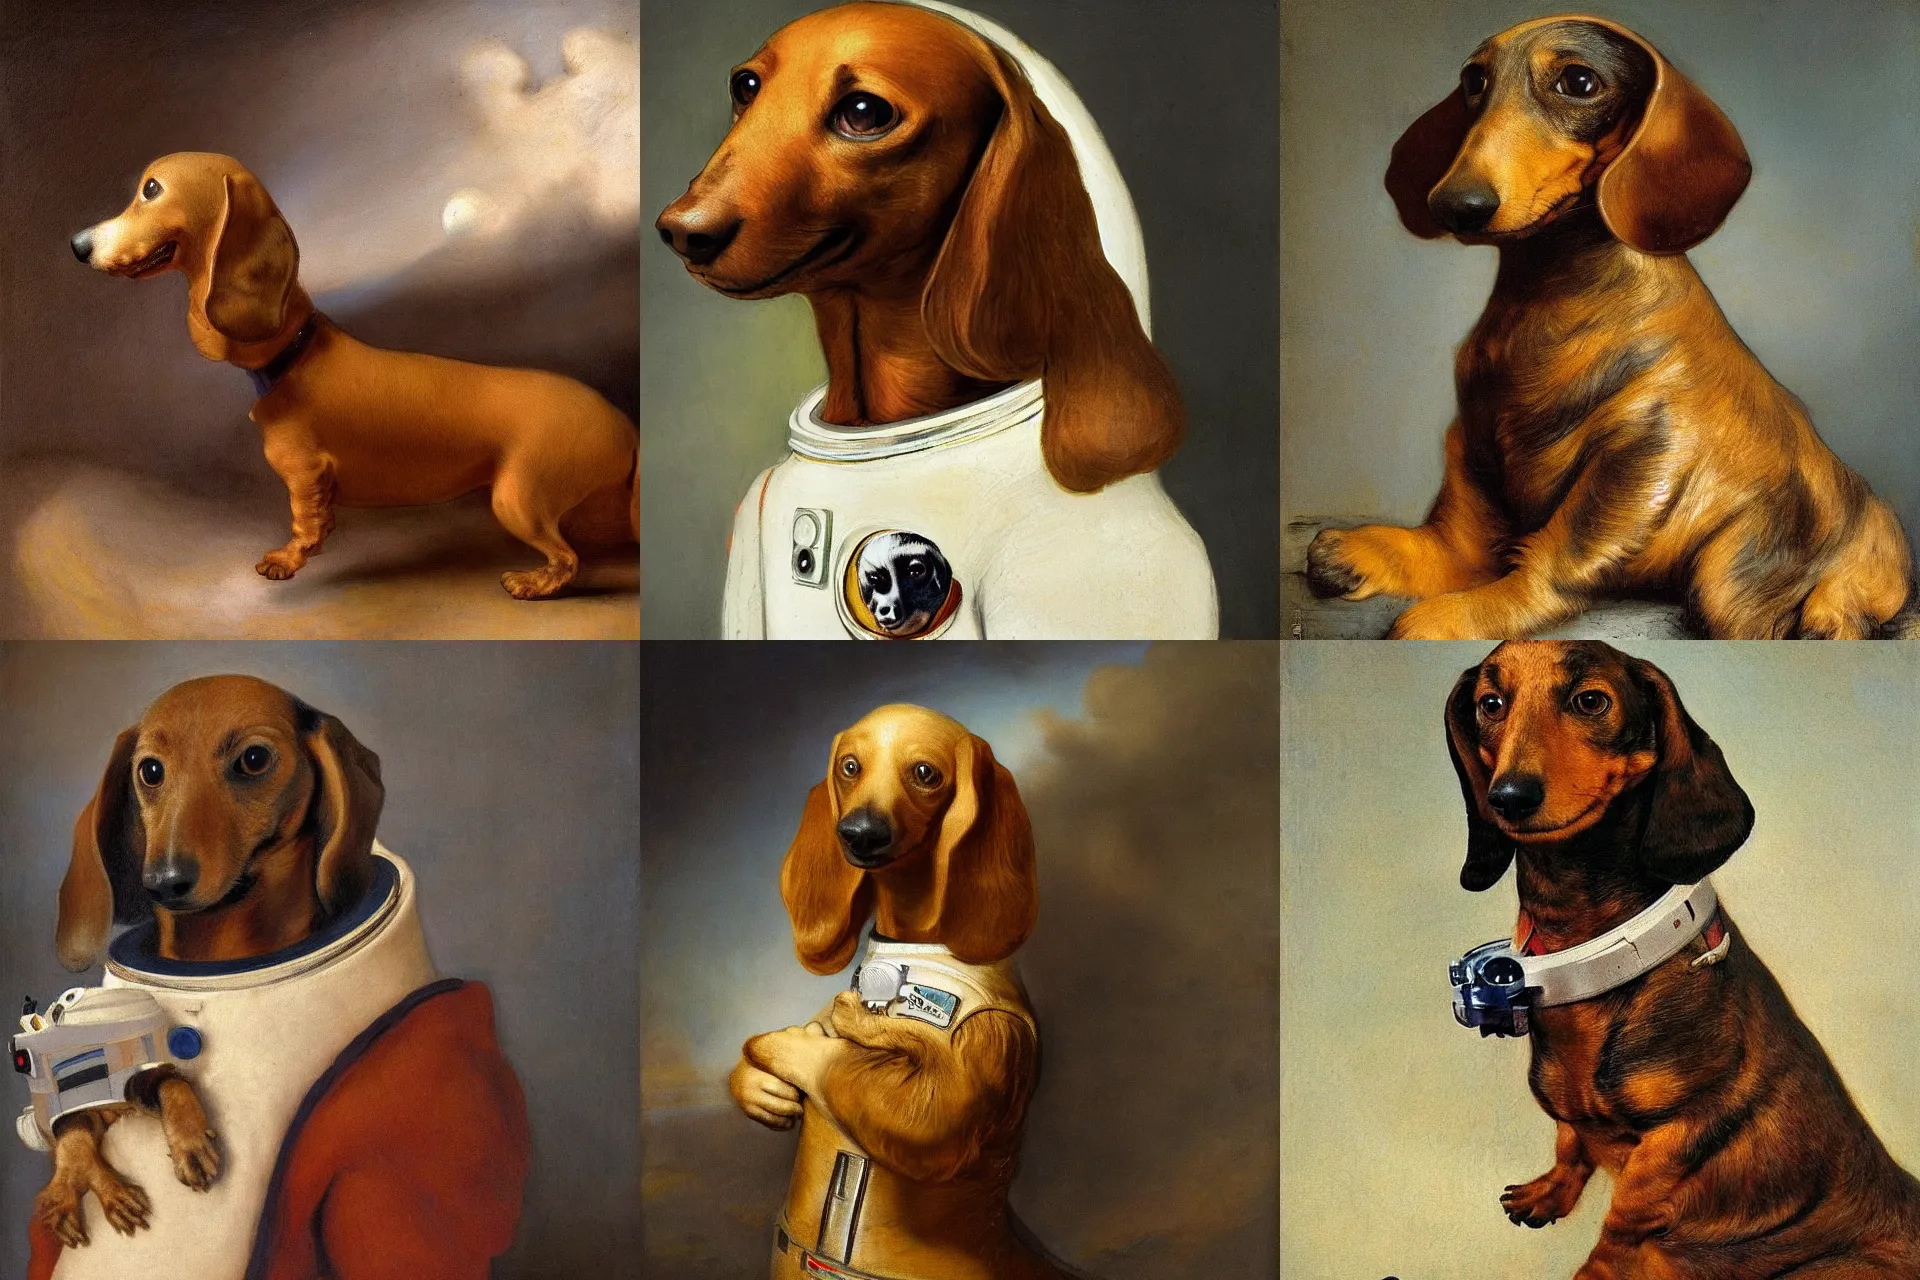 Prompt: an astronaut long hair Dachshund painted by Rembrandt